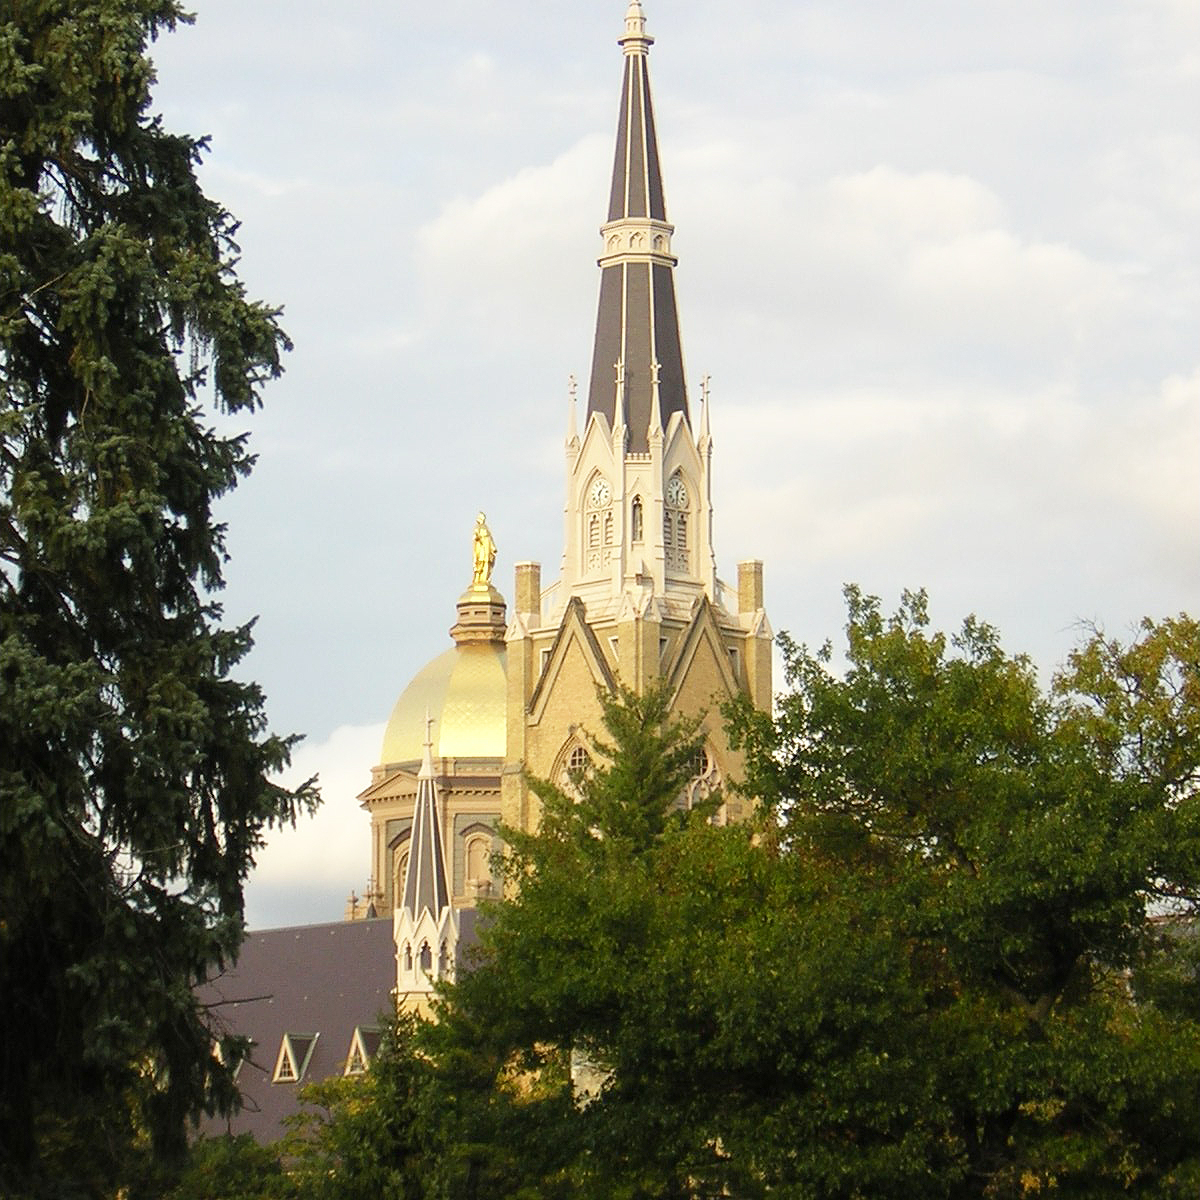 File Photo of the Baslica of the Sacred Heart and Golden Dome at the University of Notre Dame